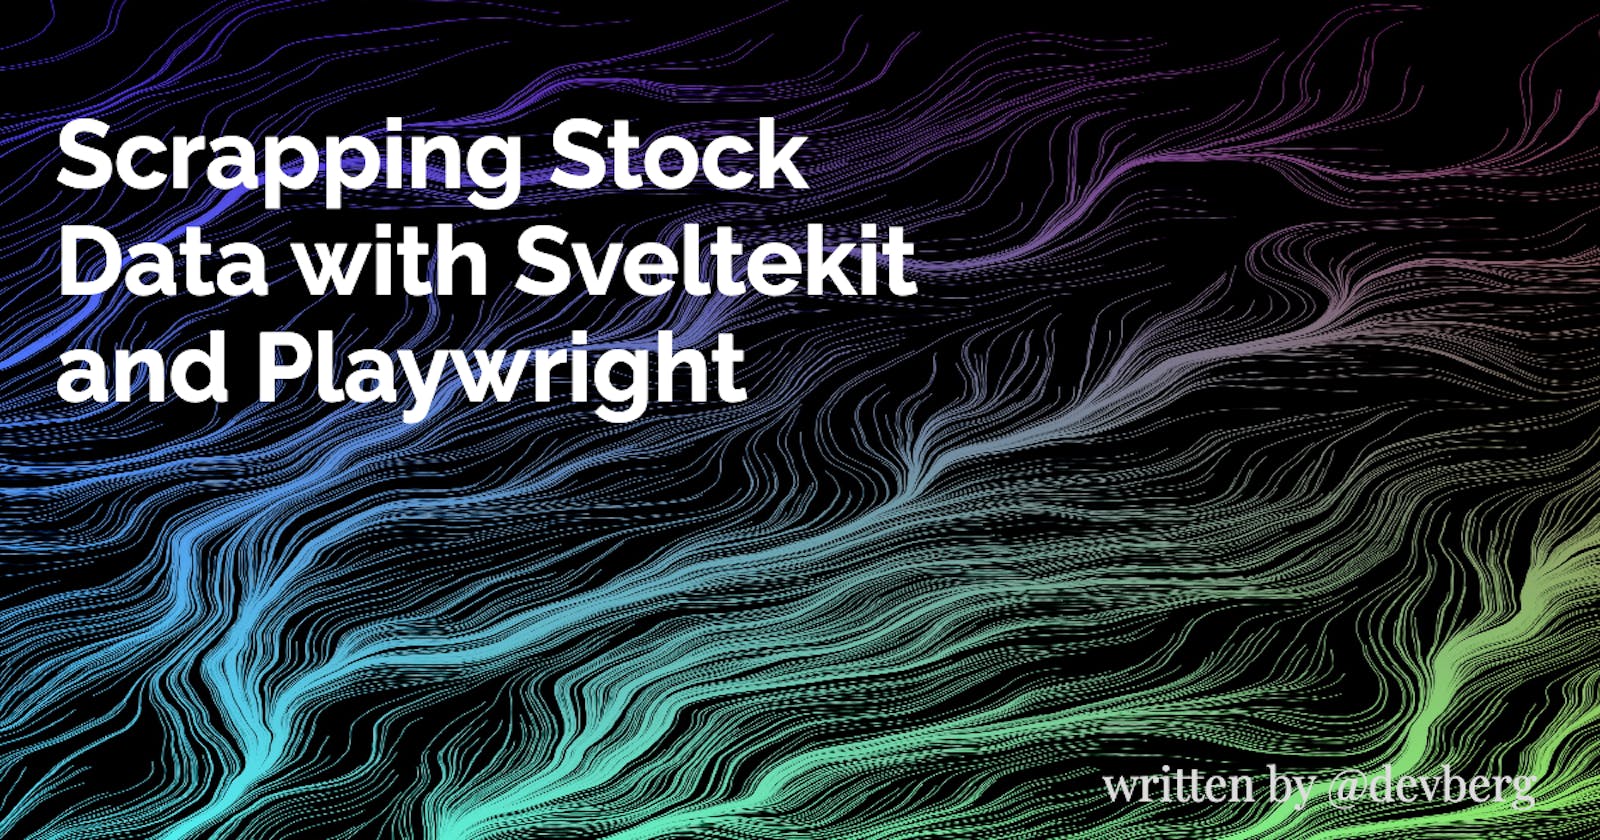 Scrapping Stock Data with Sveltekit and Playwright